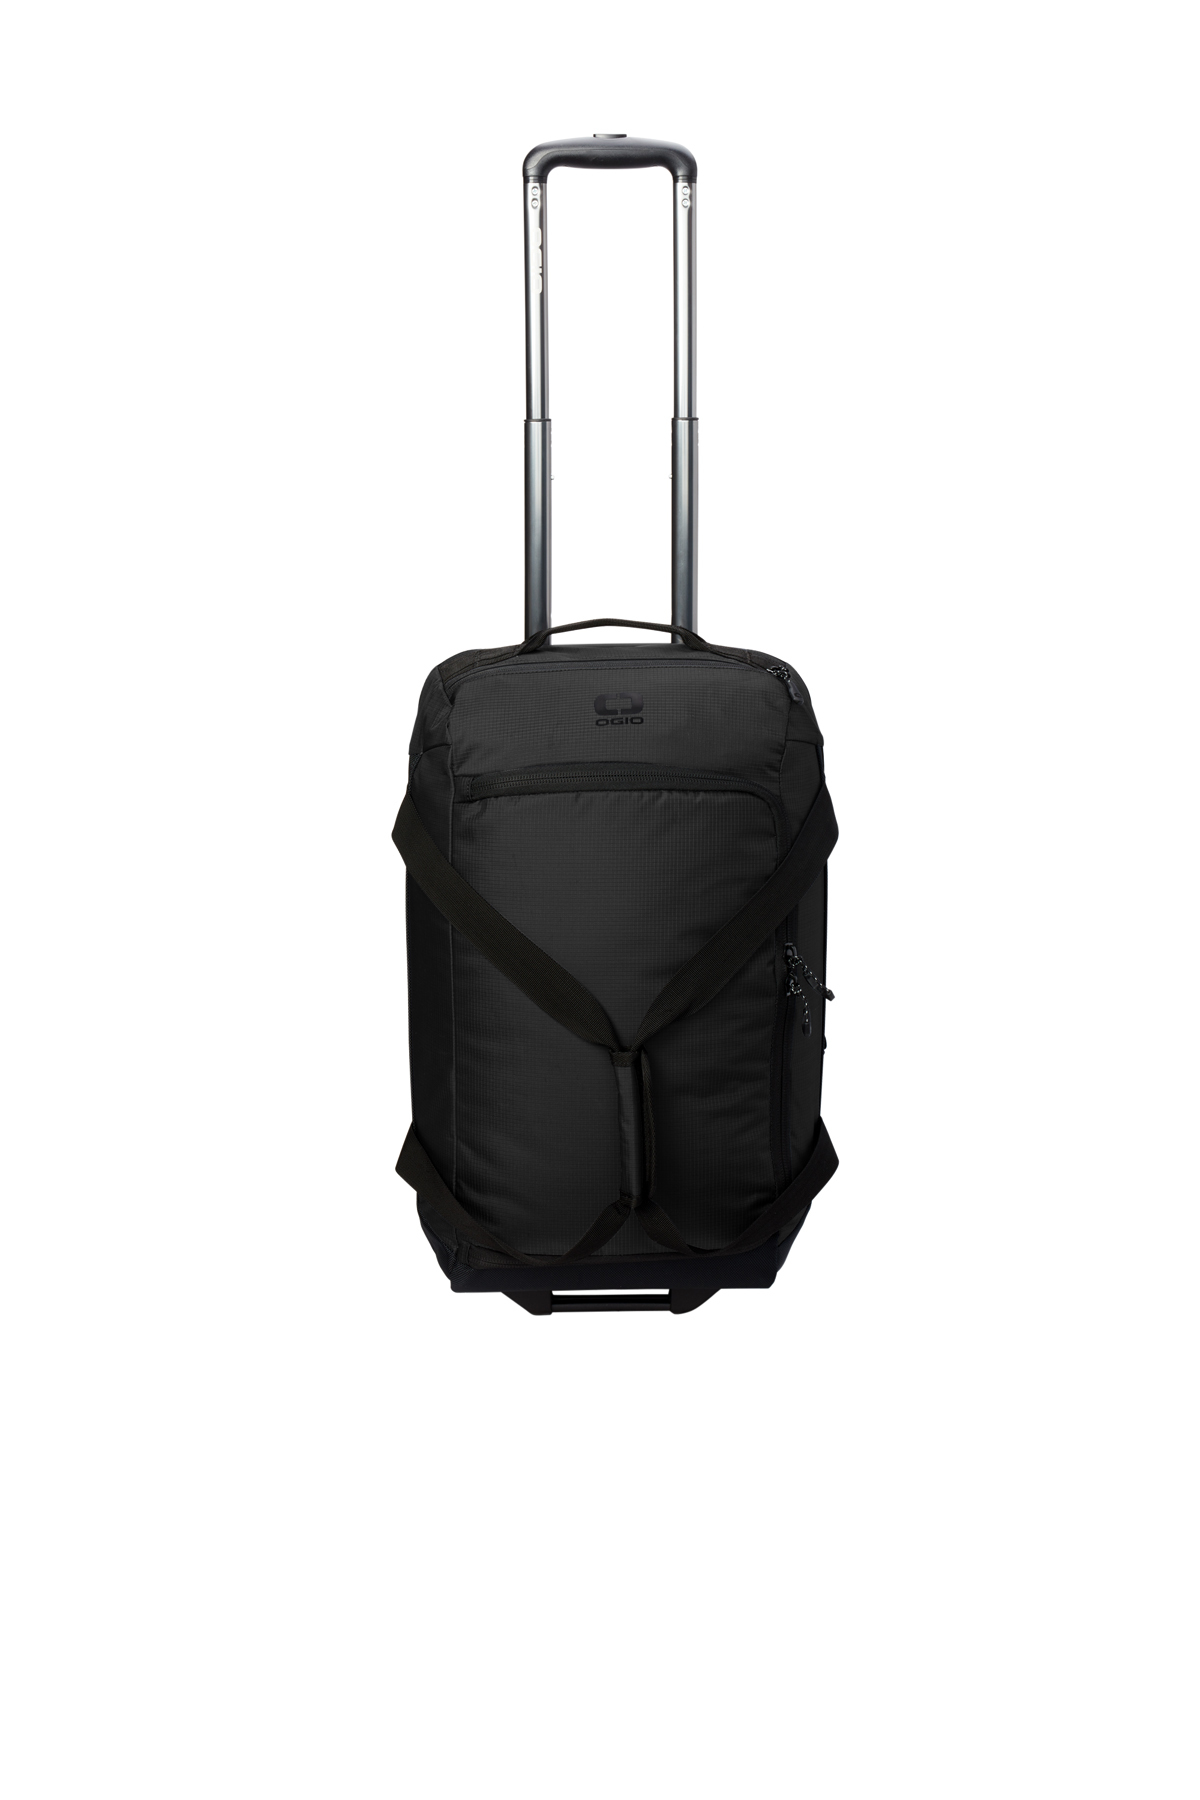 OGIO Passage Wheeled Carry-On Duffel | Product | SanMar